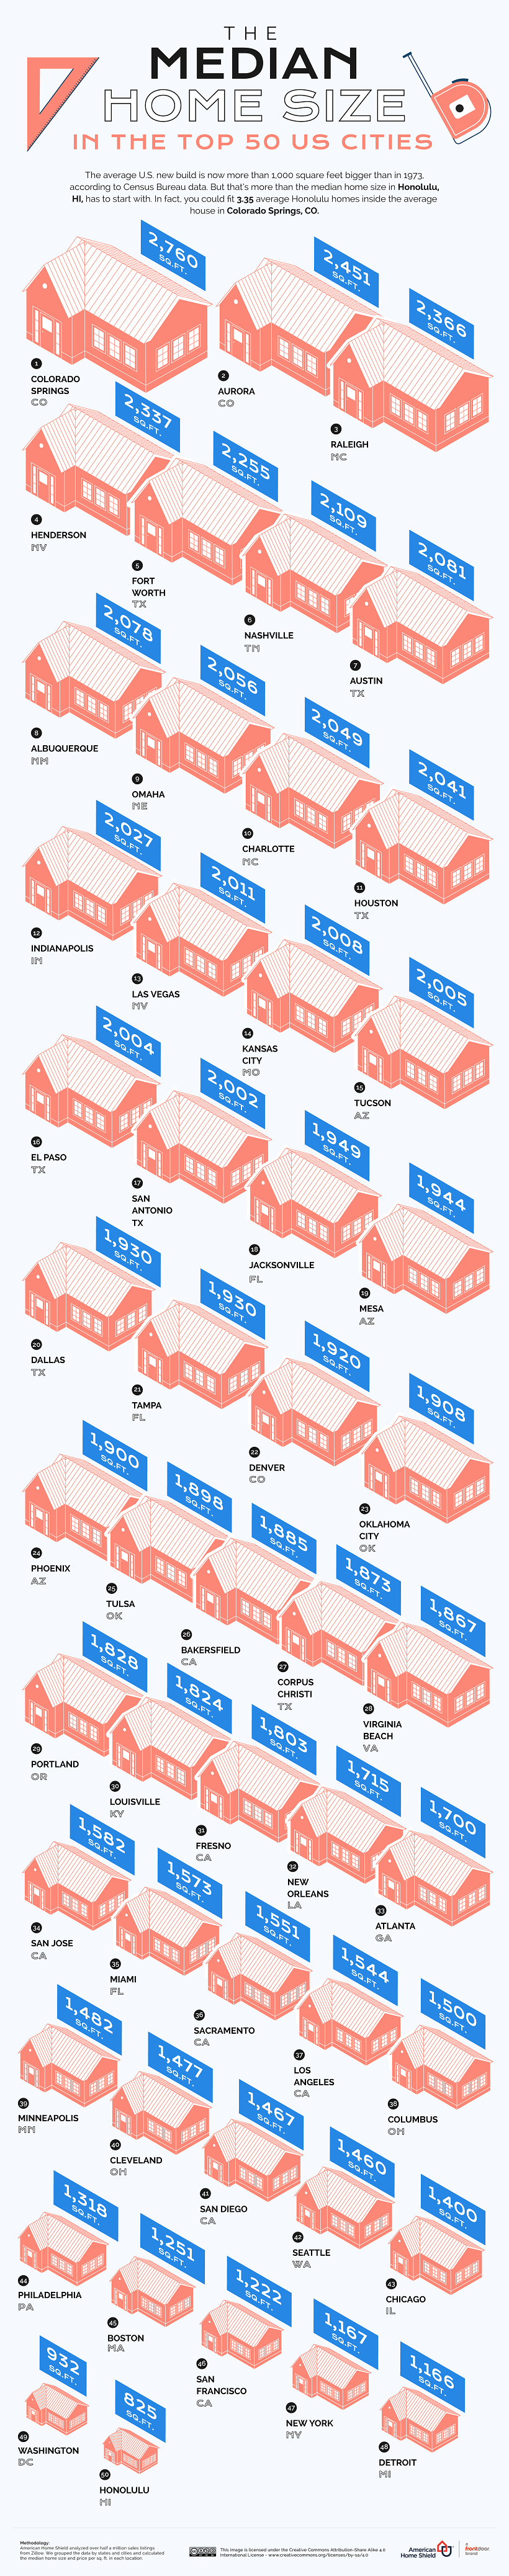 Average home size in 50 U.S. cities